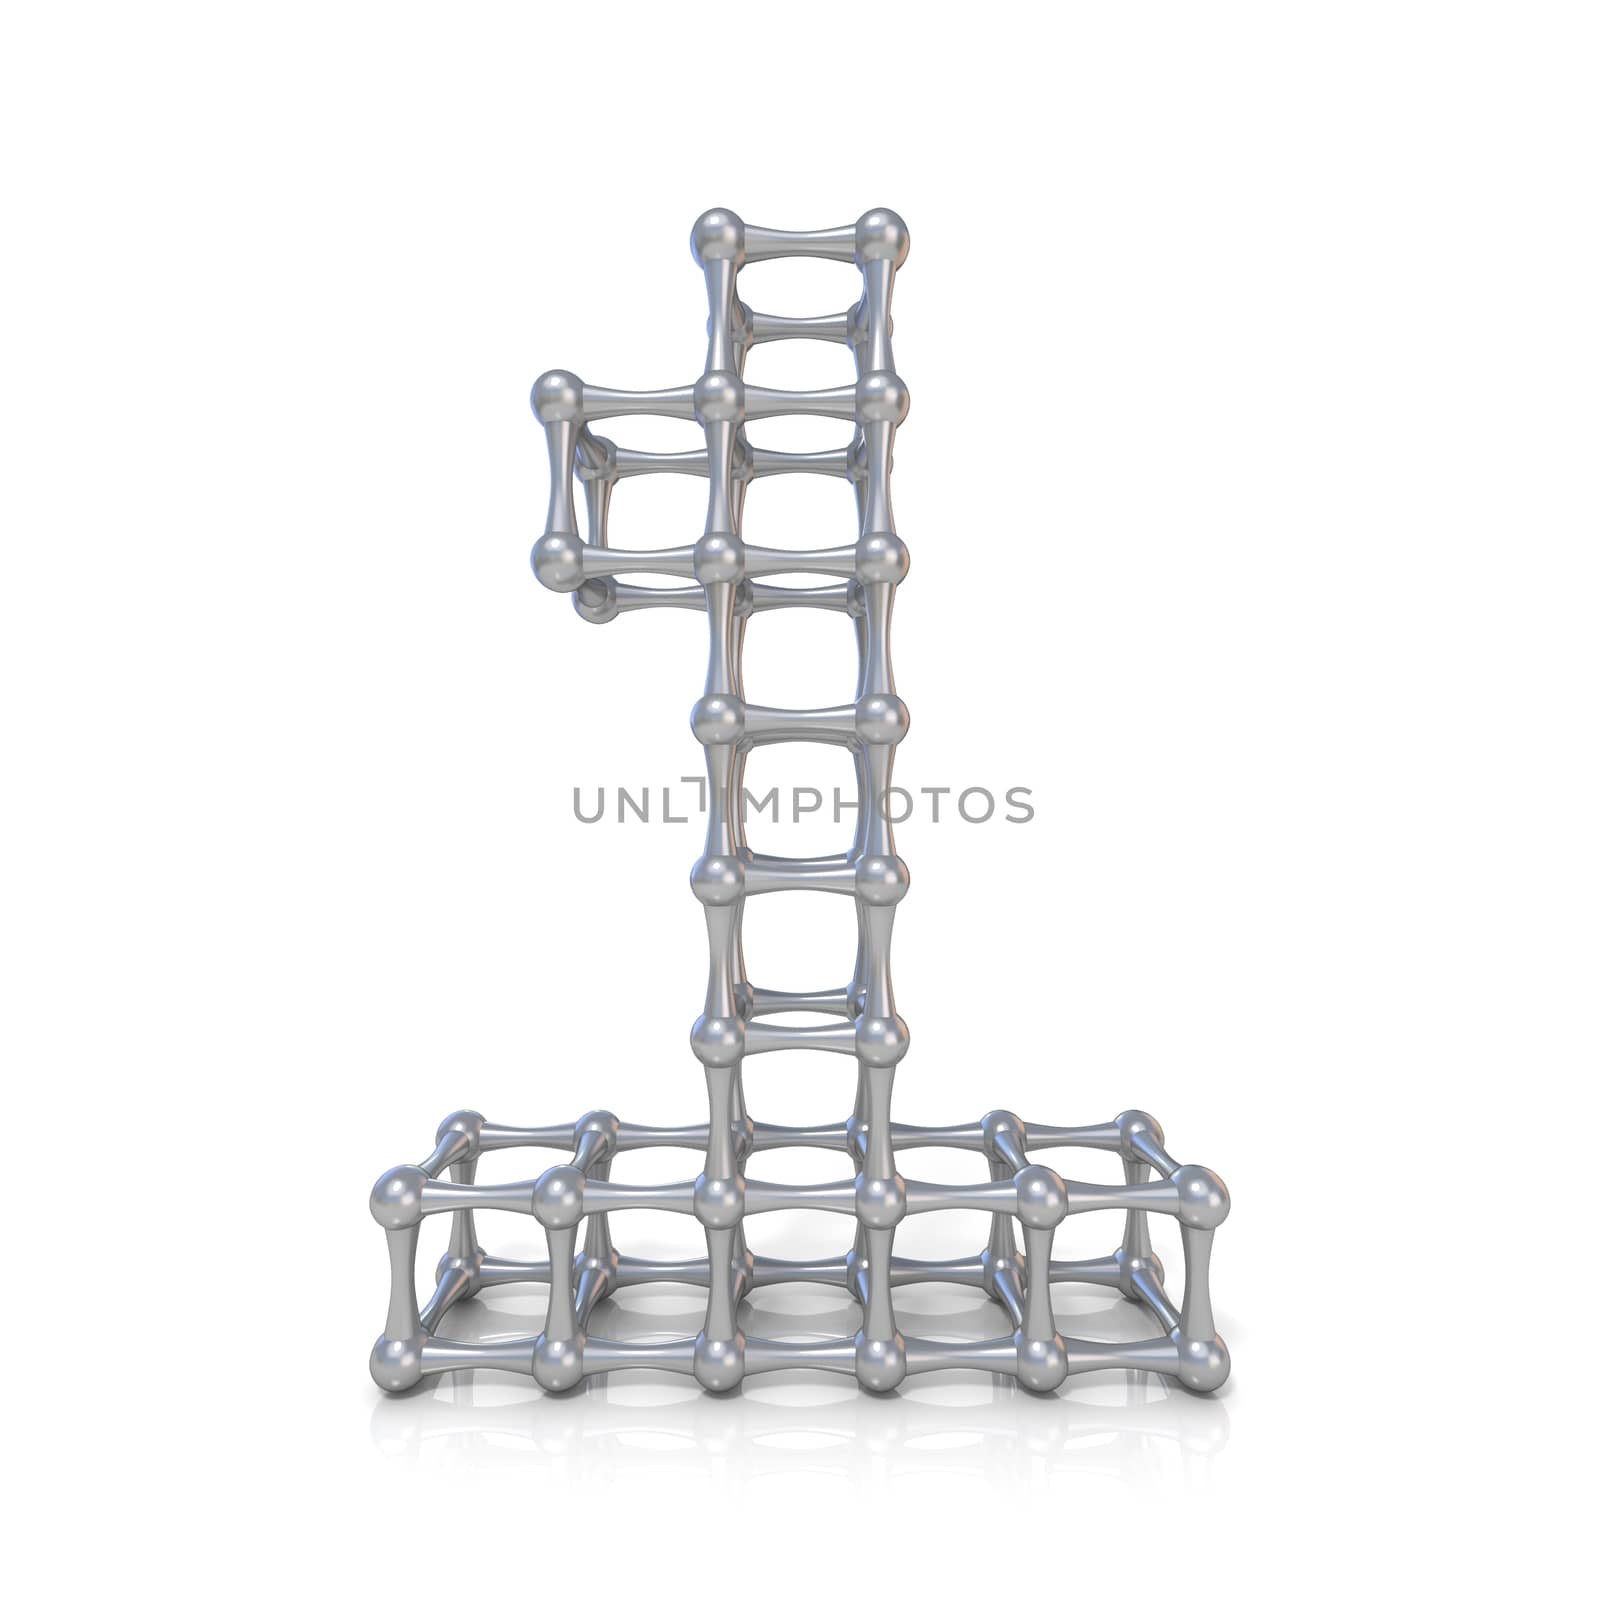 Metal lattice digit number ONE 1 3D render illustration isolated on white background